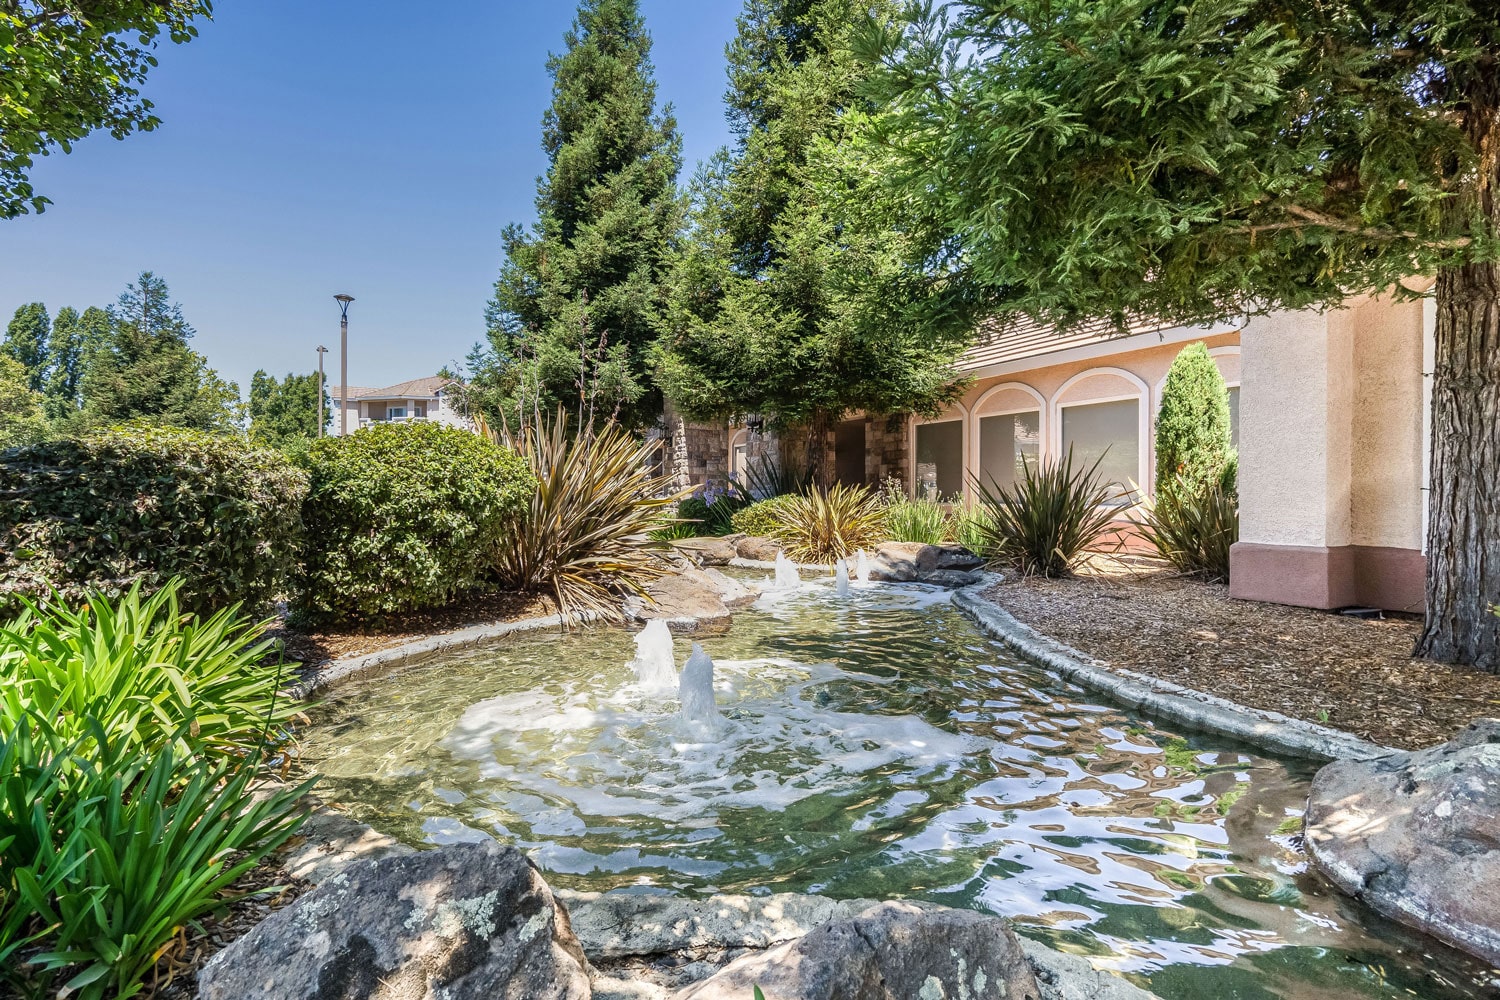 Outdoor community water feature with fountains and lush green landscaping and rocks.